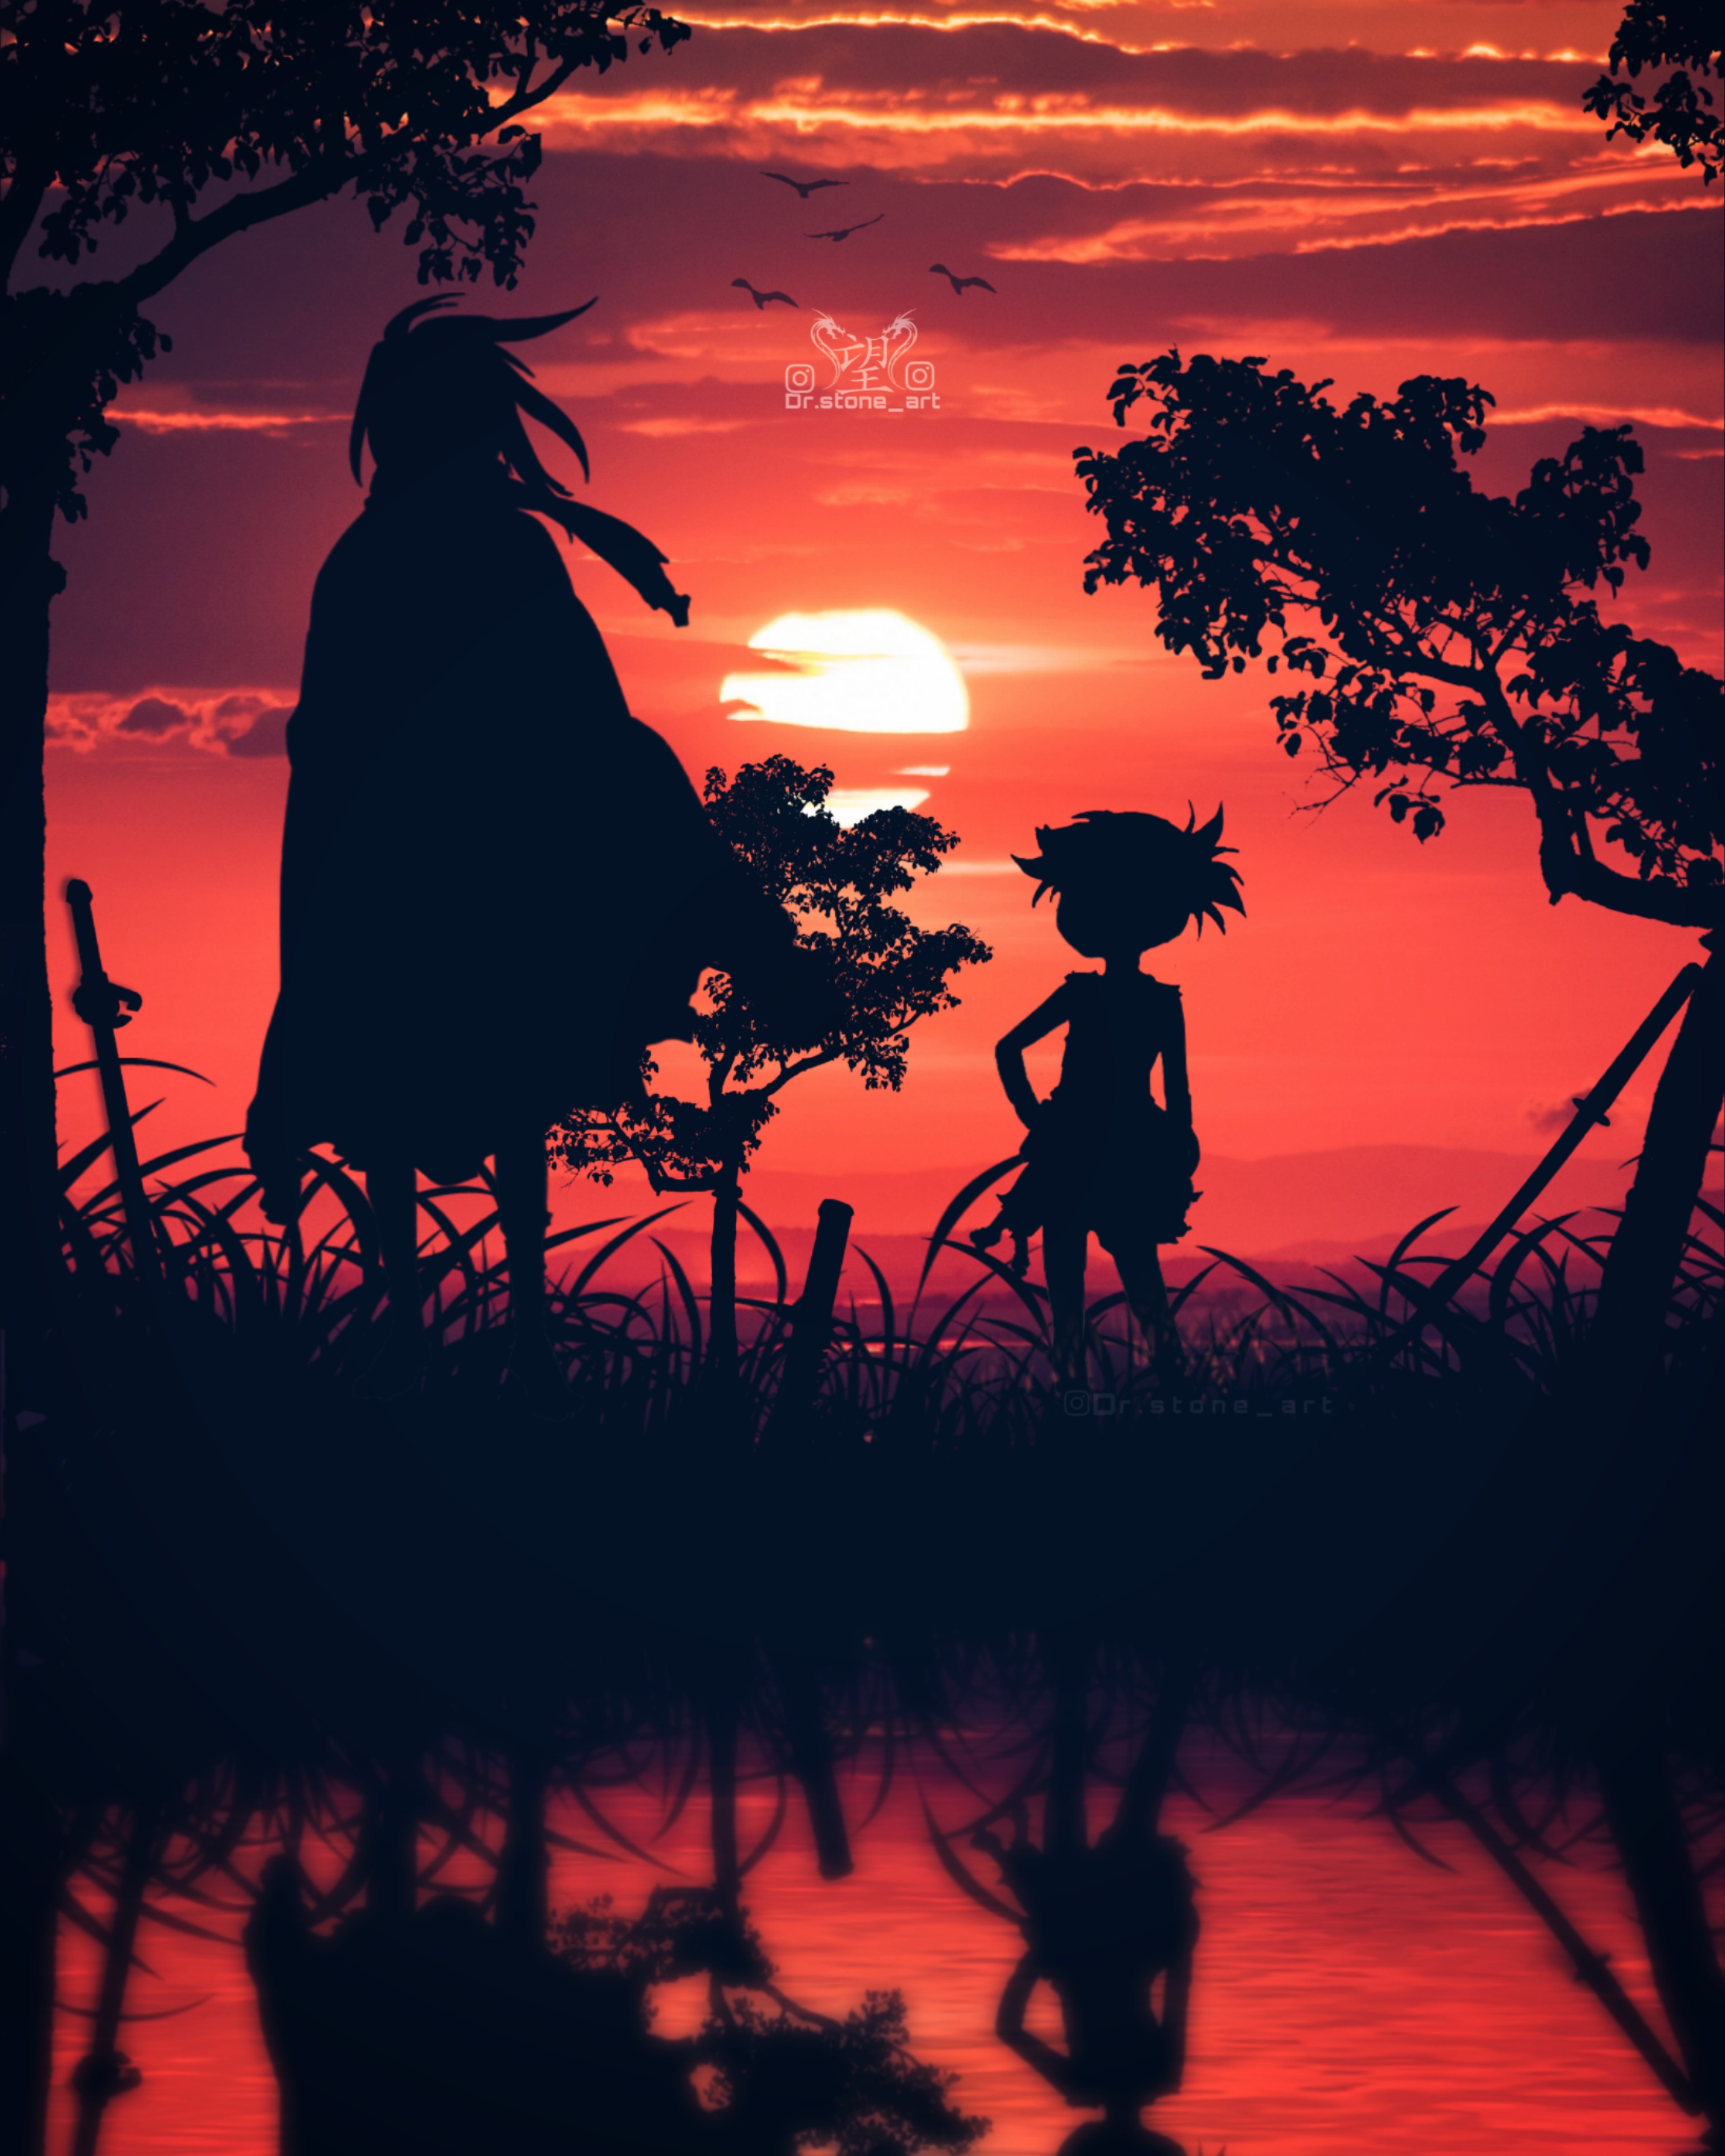 Dororo Silhouette Wallpaper Editing By Me By Drstoneart On Deviantart